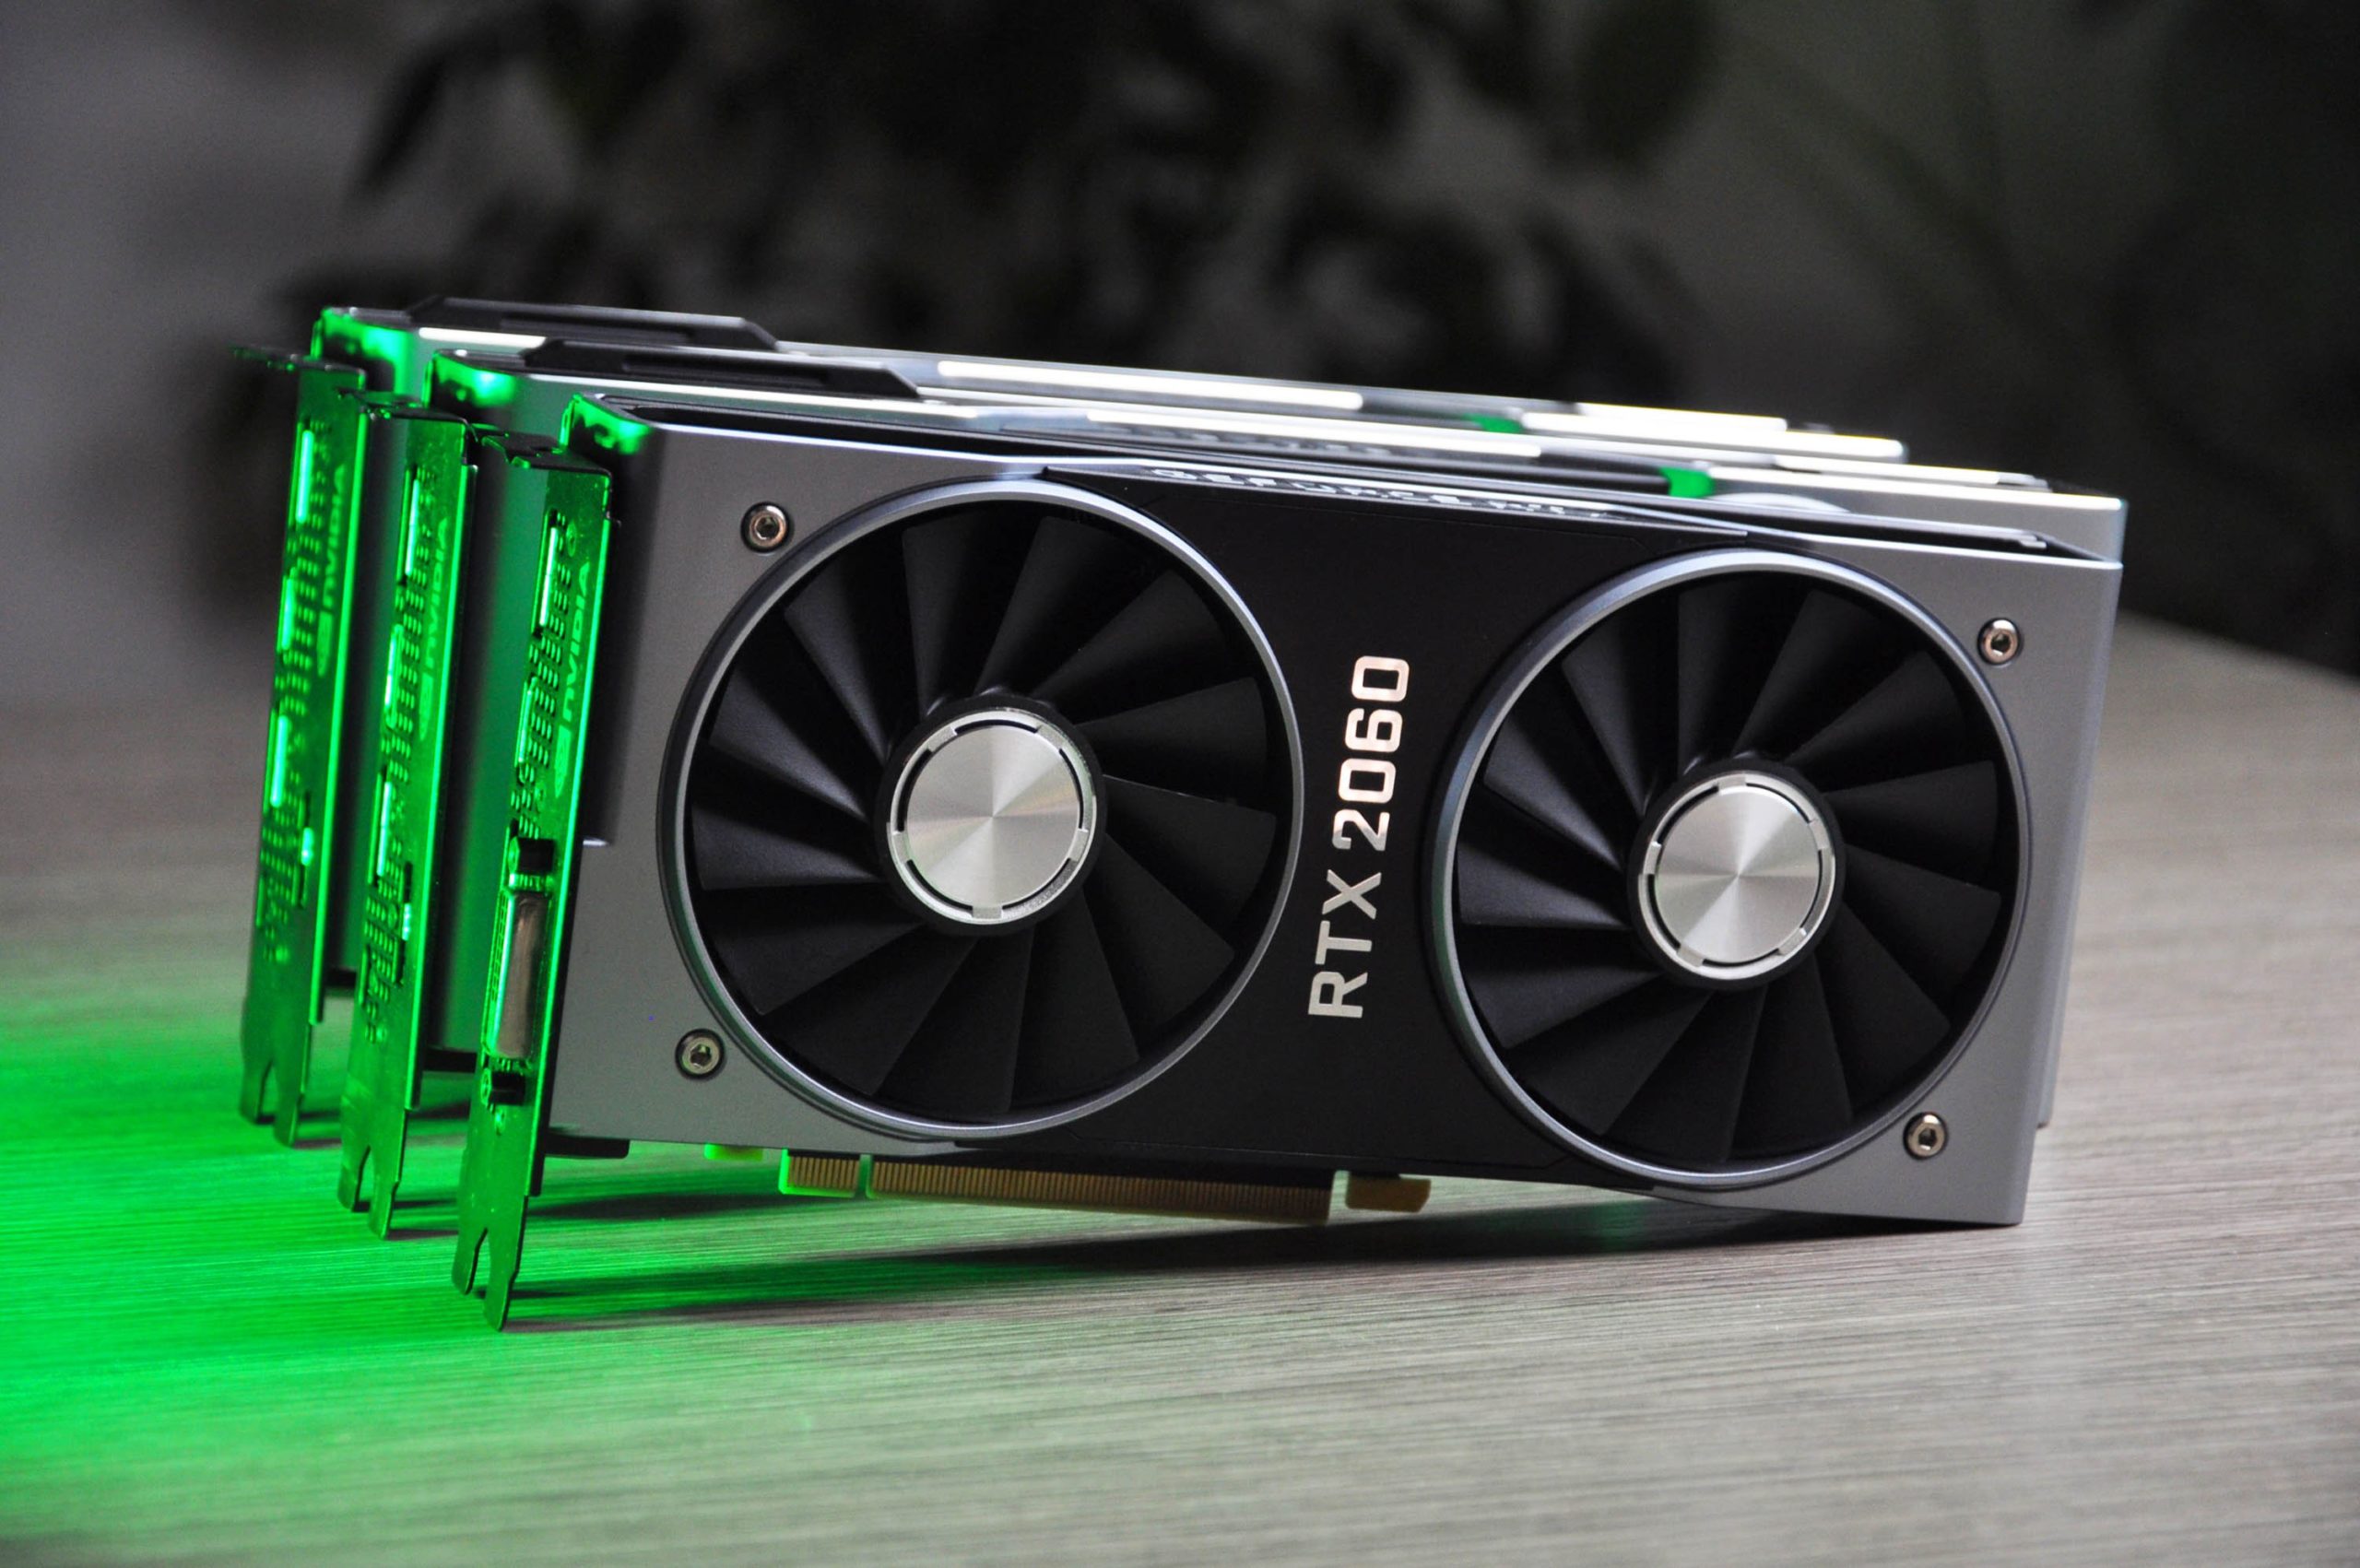 We show you the specifications of the new RTX 2060 12GB